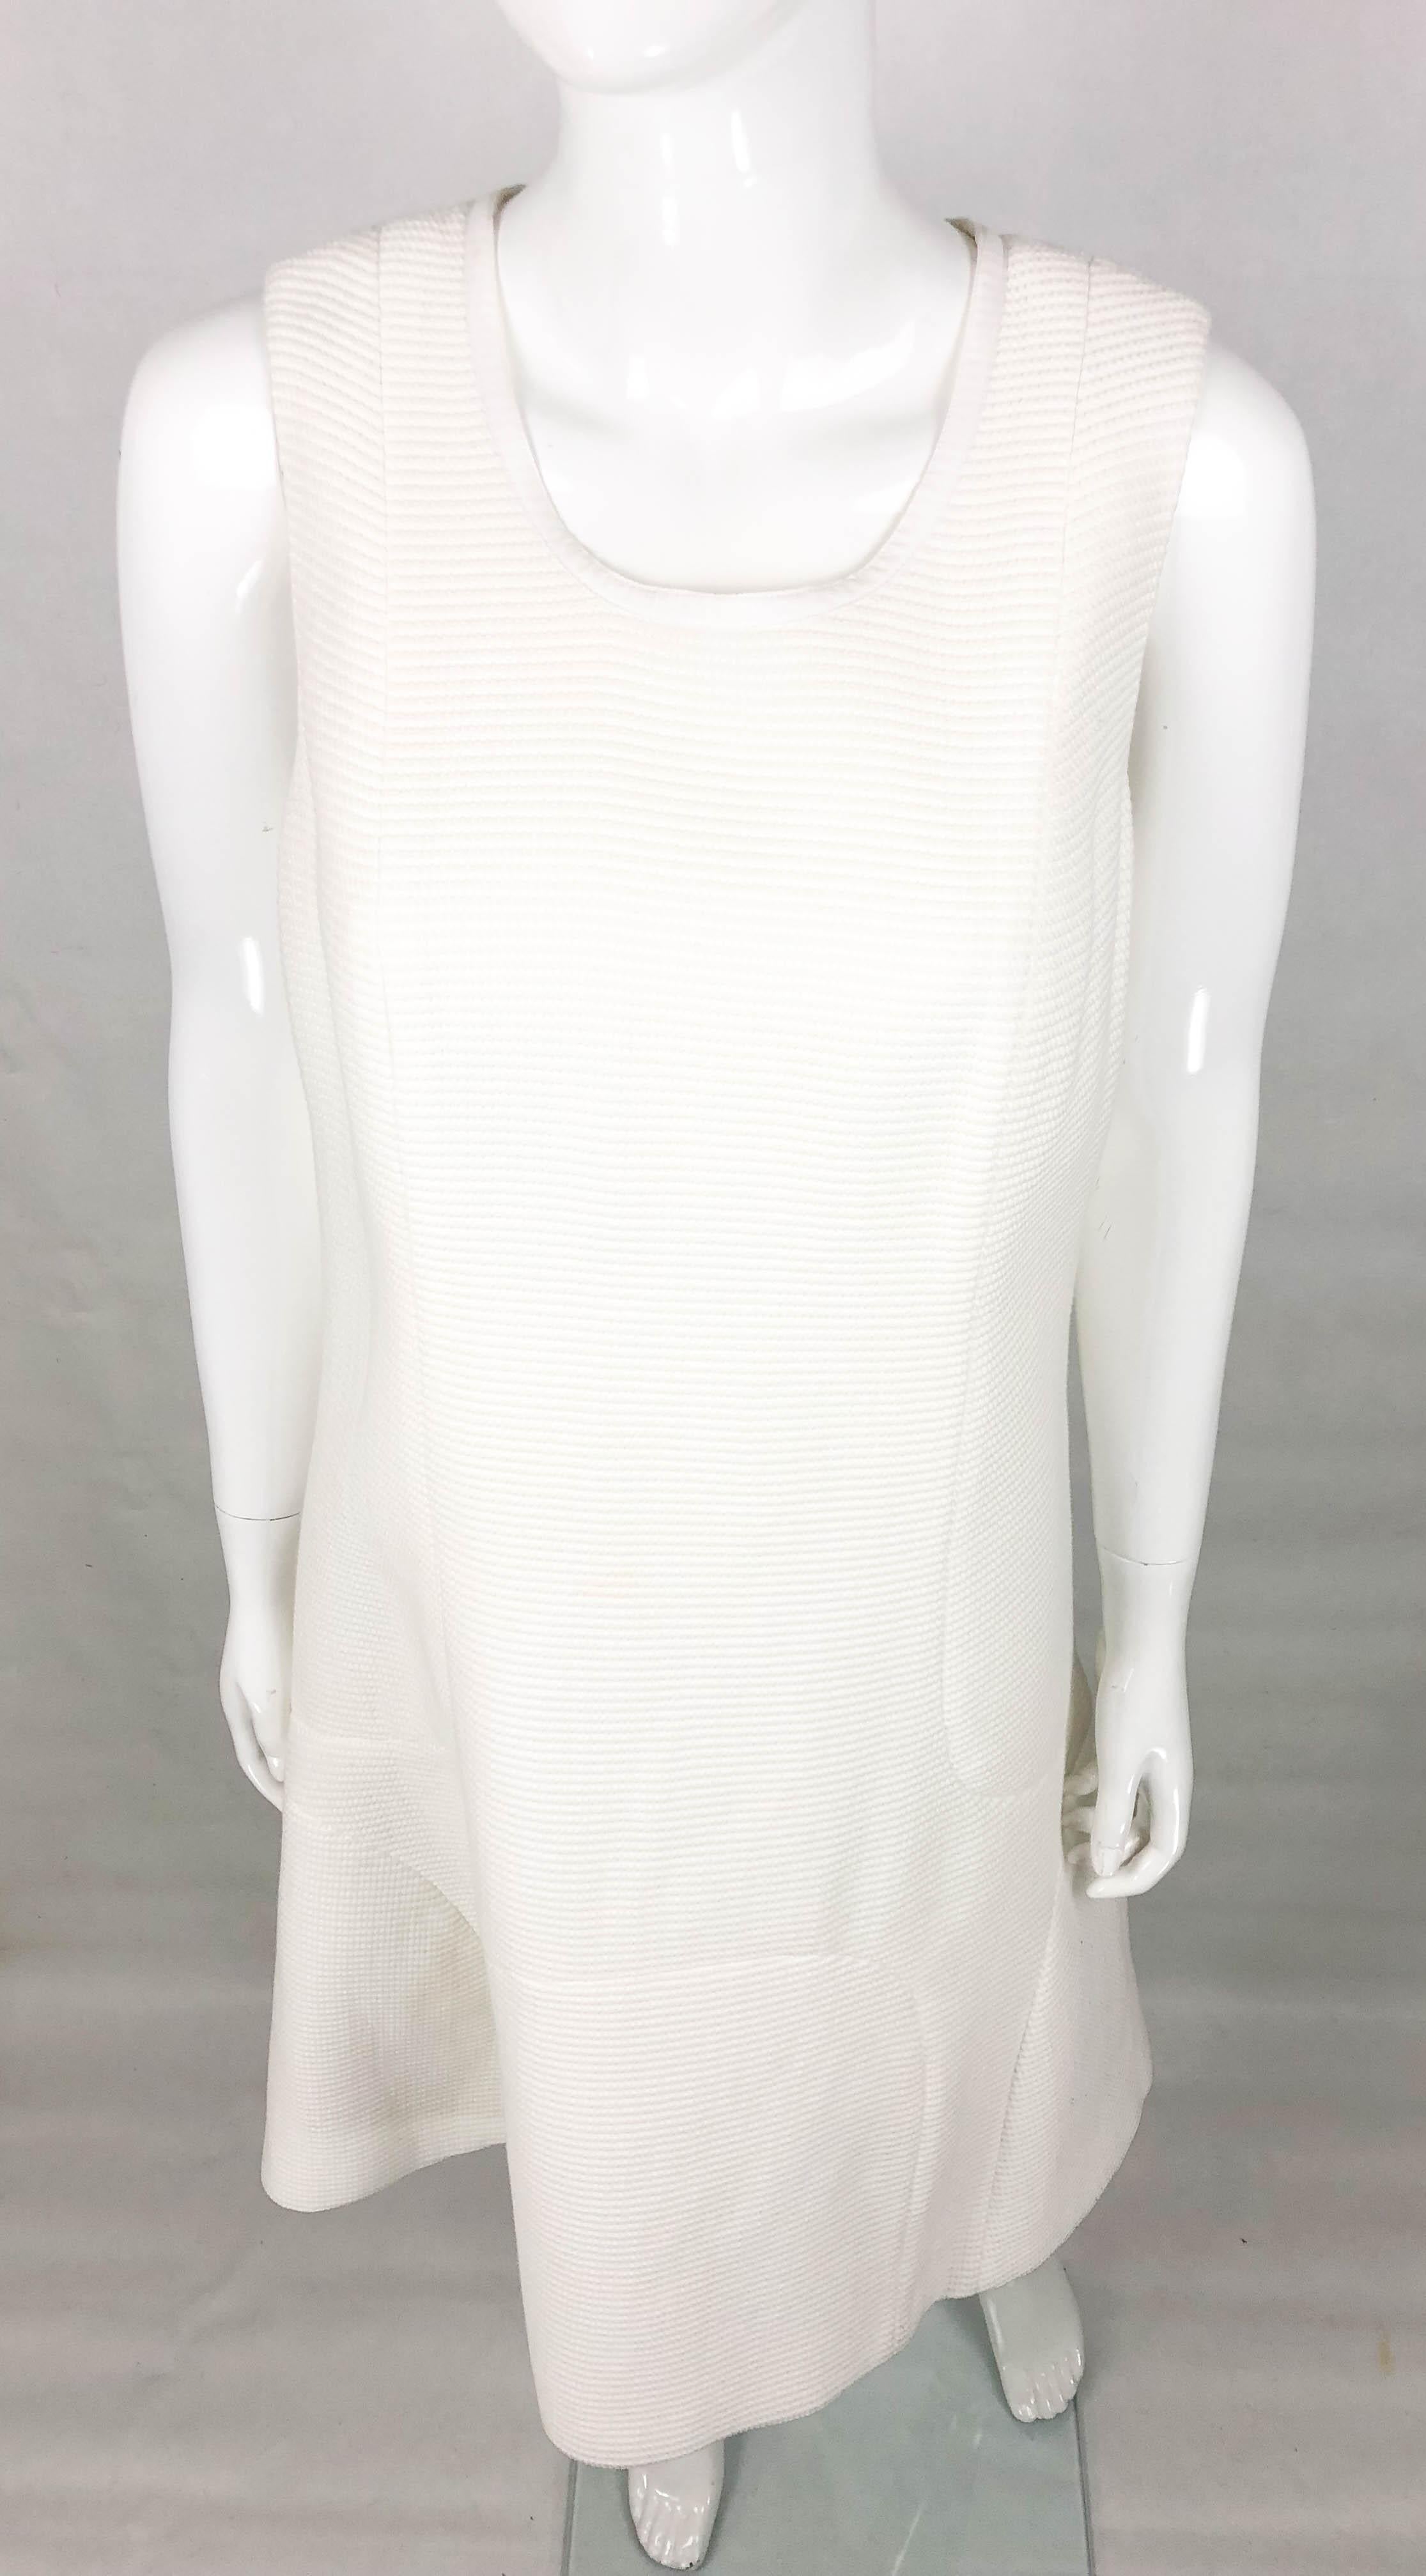 Chanel White Waffle Cotton Dress In Excellent Condition For Sale In London, Chelsea